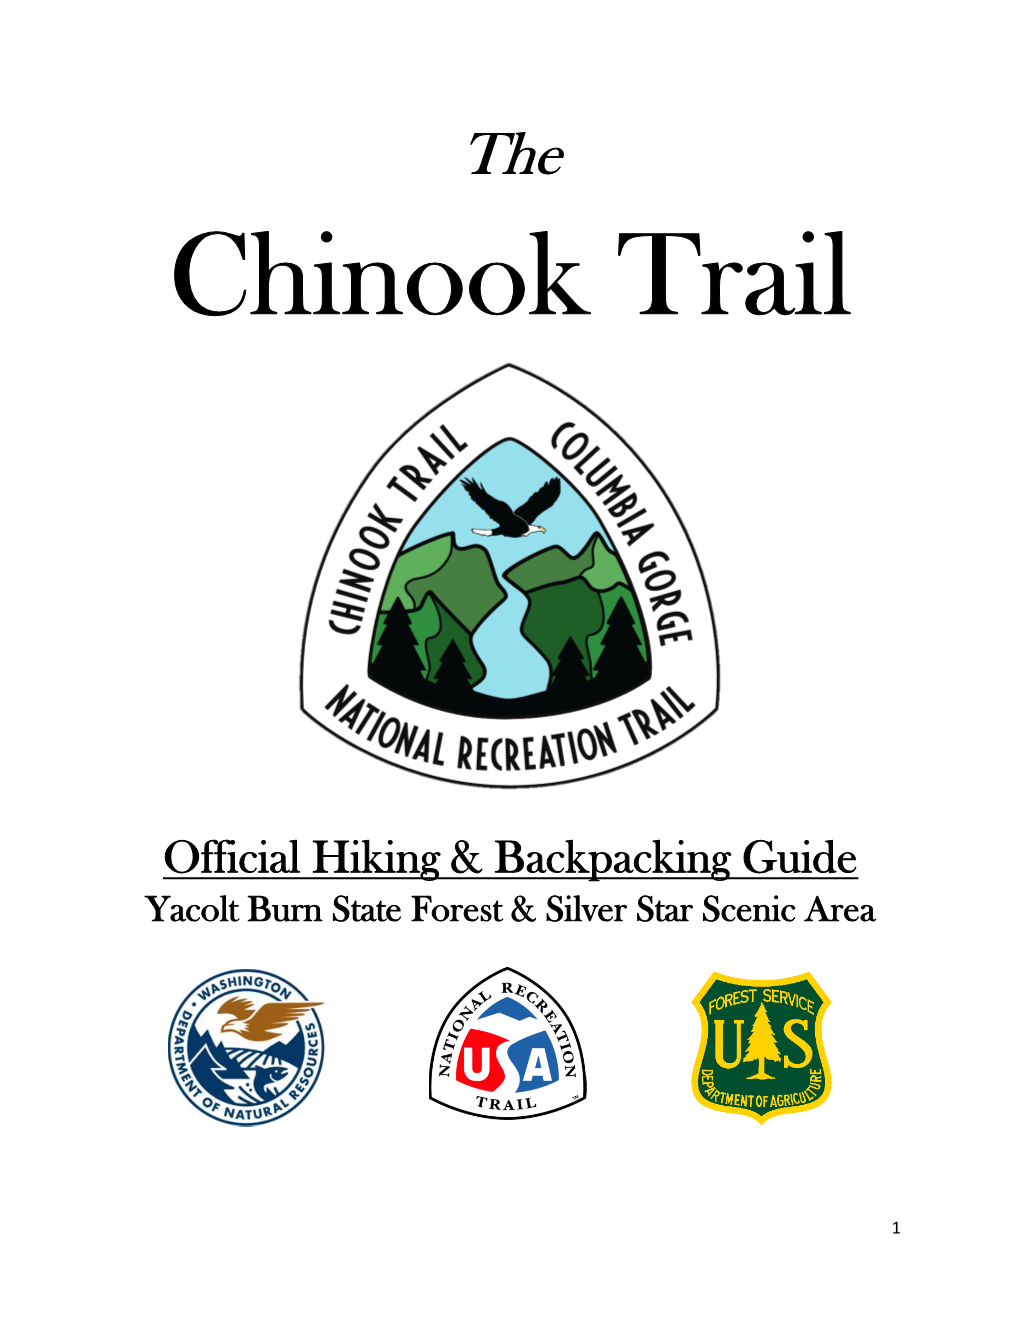 Official Hiking & Backpacking Guide